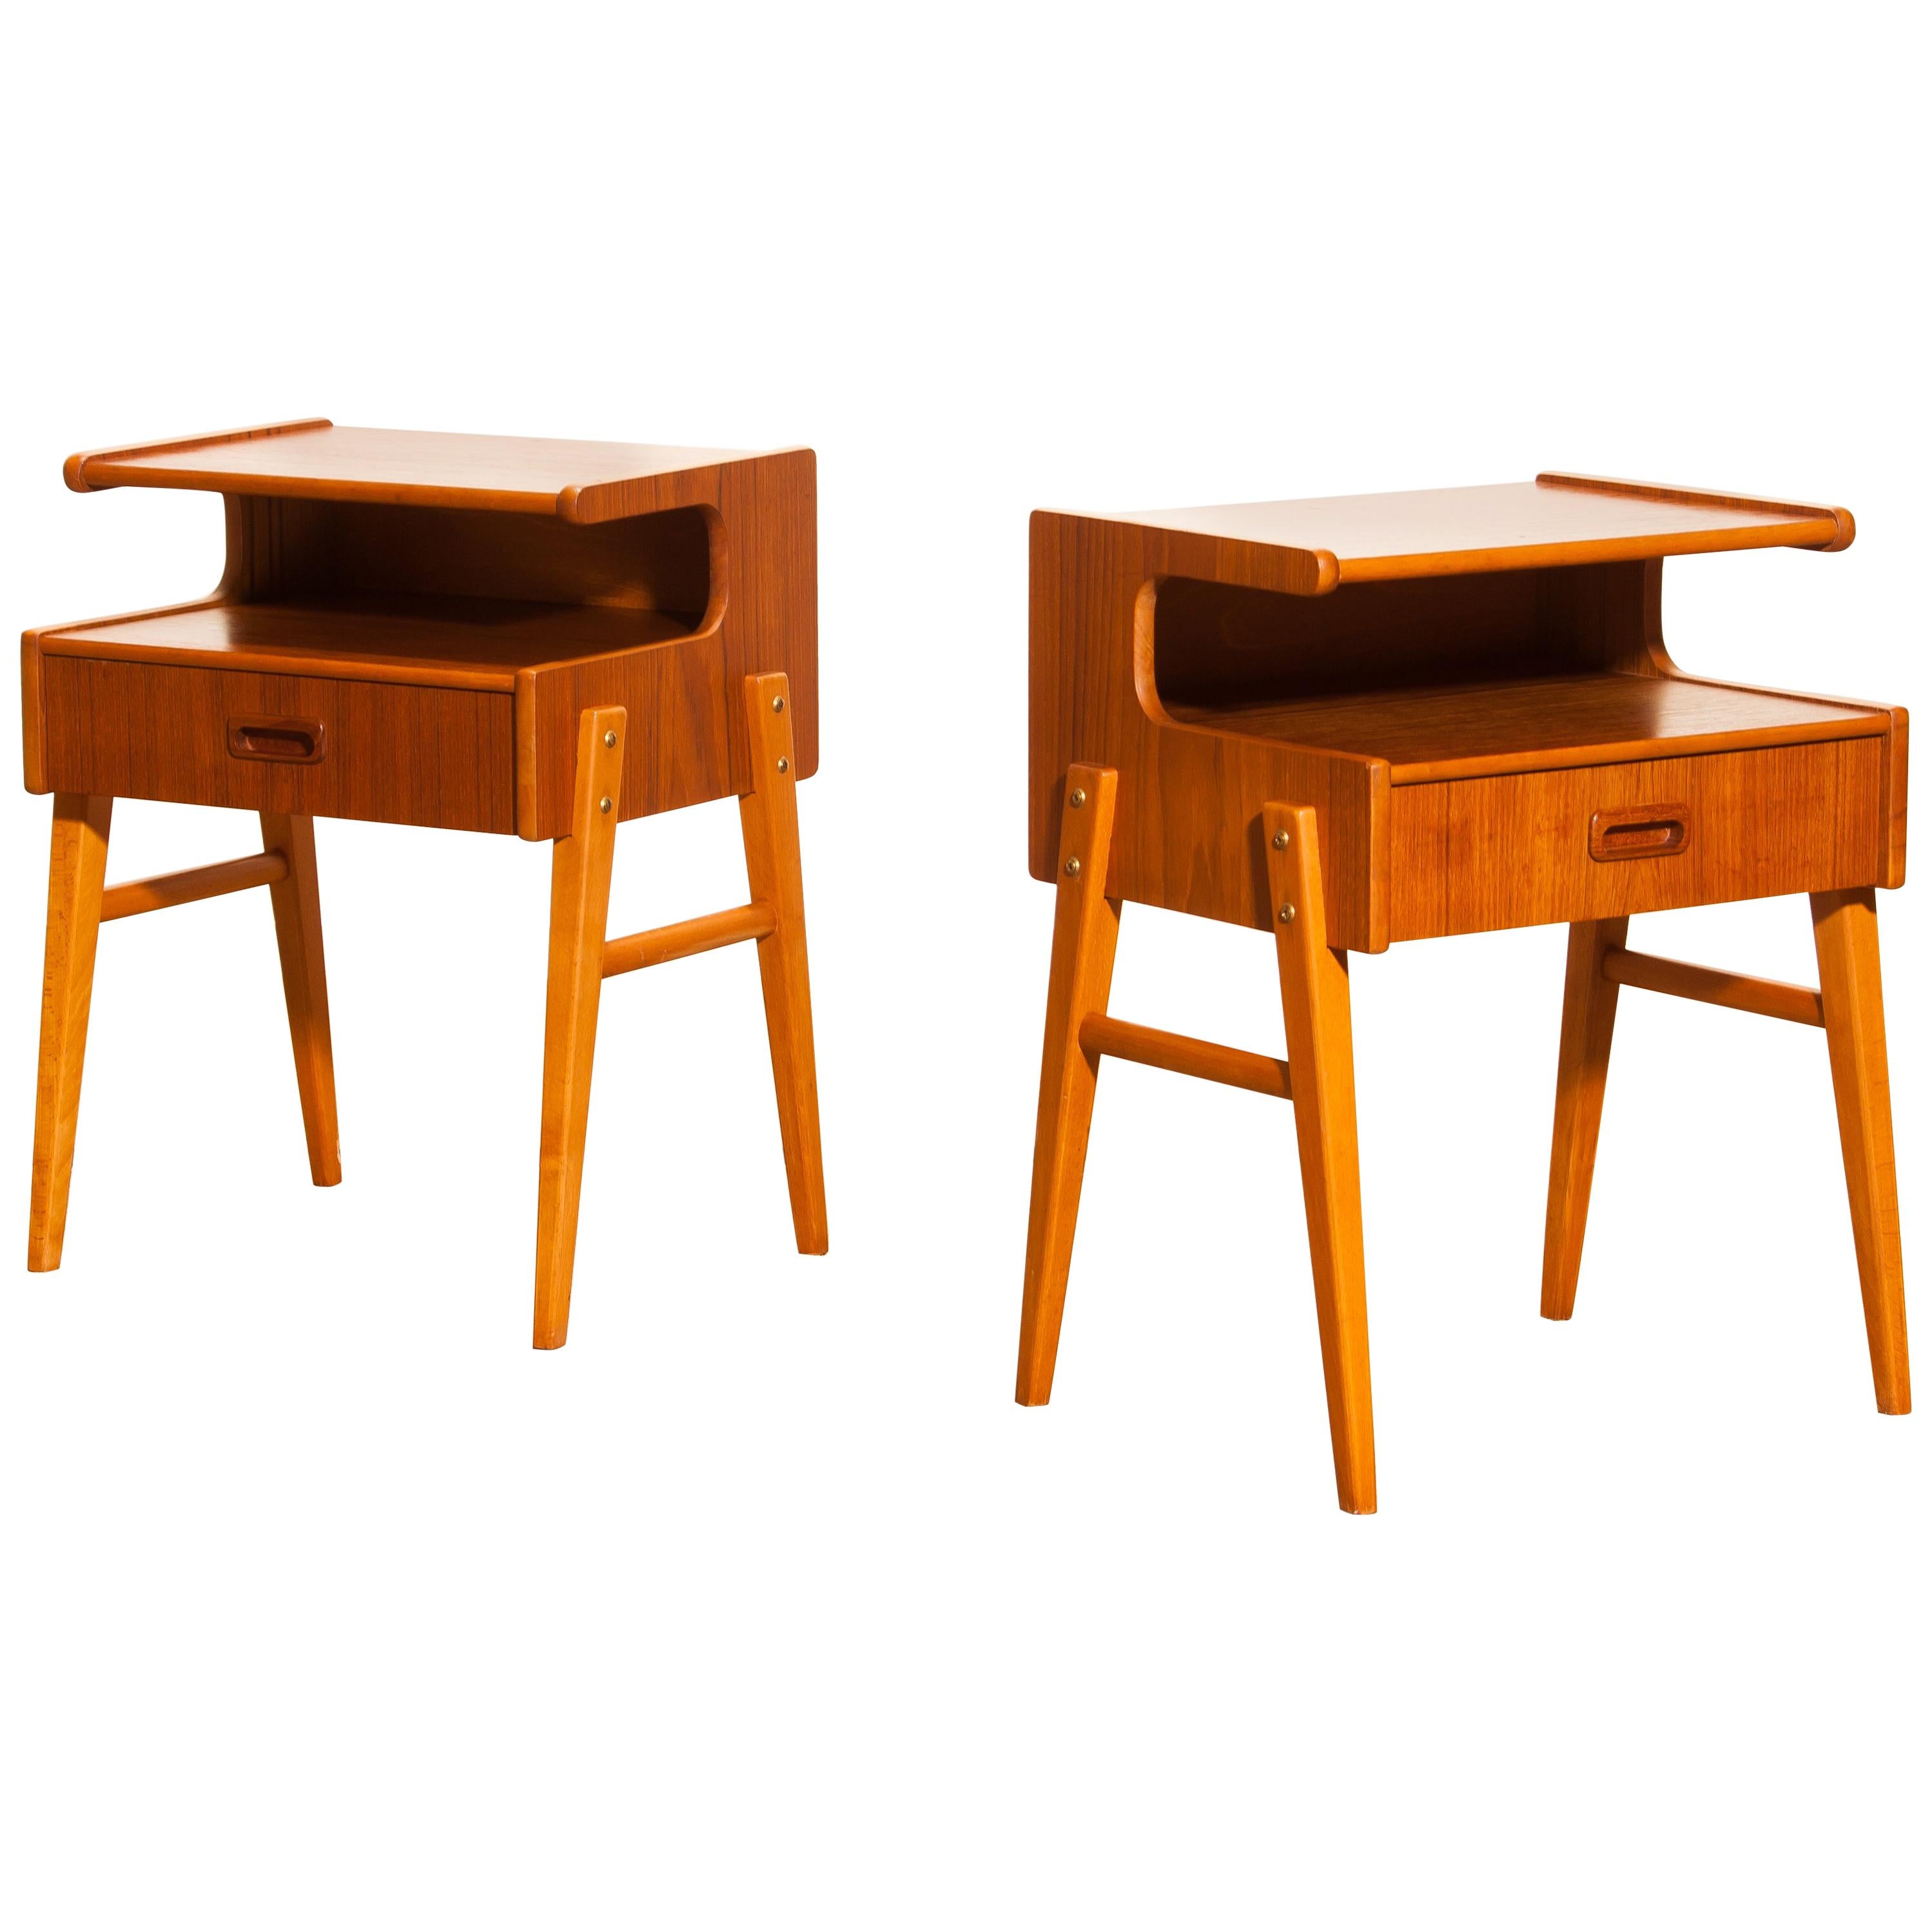 A pair of two lovely bedside tables in beautiful ‘C’ shape.
These tables are made of teak.
Each table has a drawer.
They are in very nice condition.
Period 1960s.
Dimensions: H 54 cm, W 40 cm, D 33 cm.